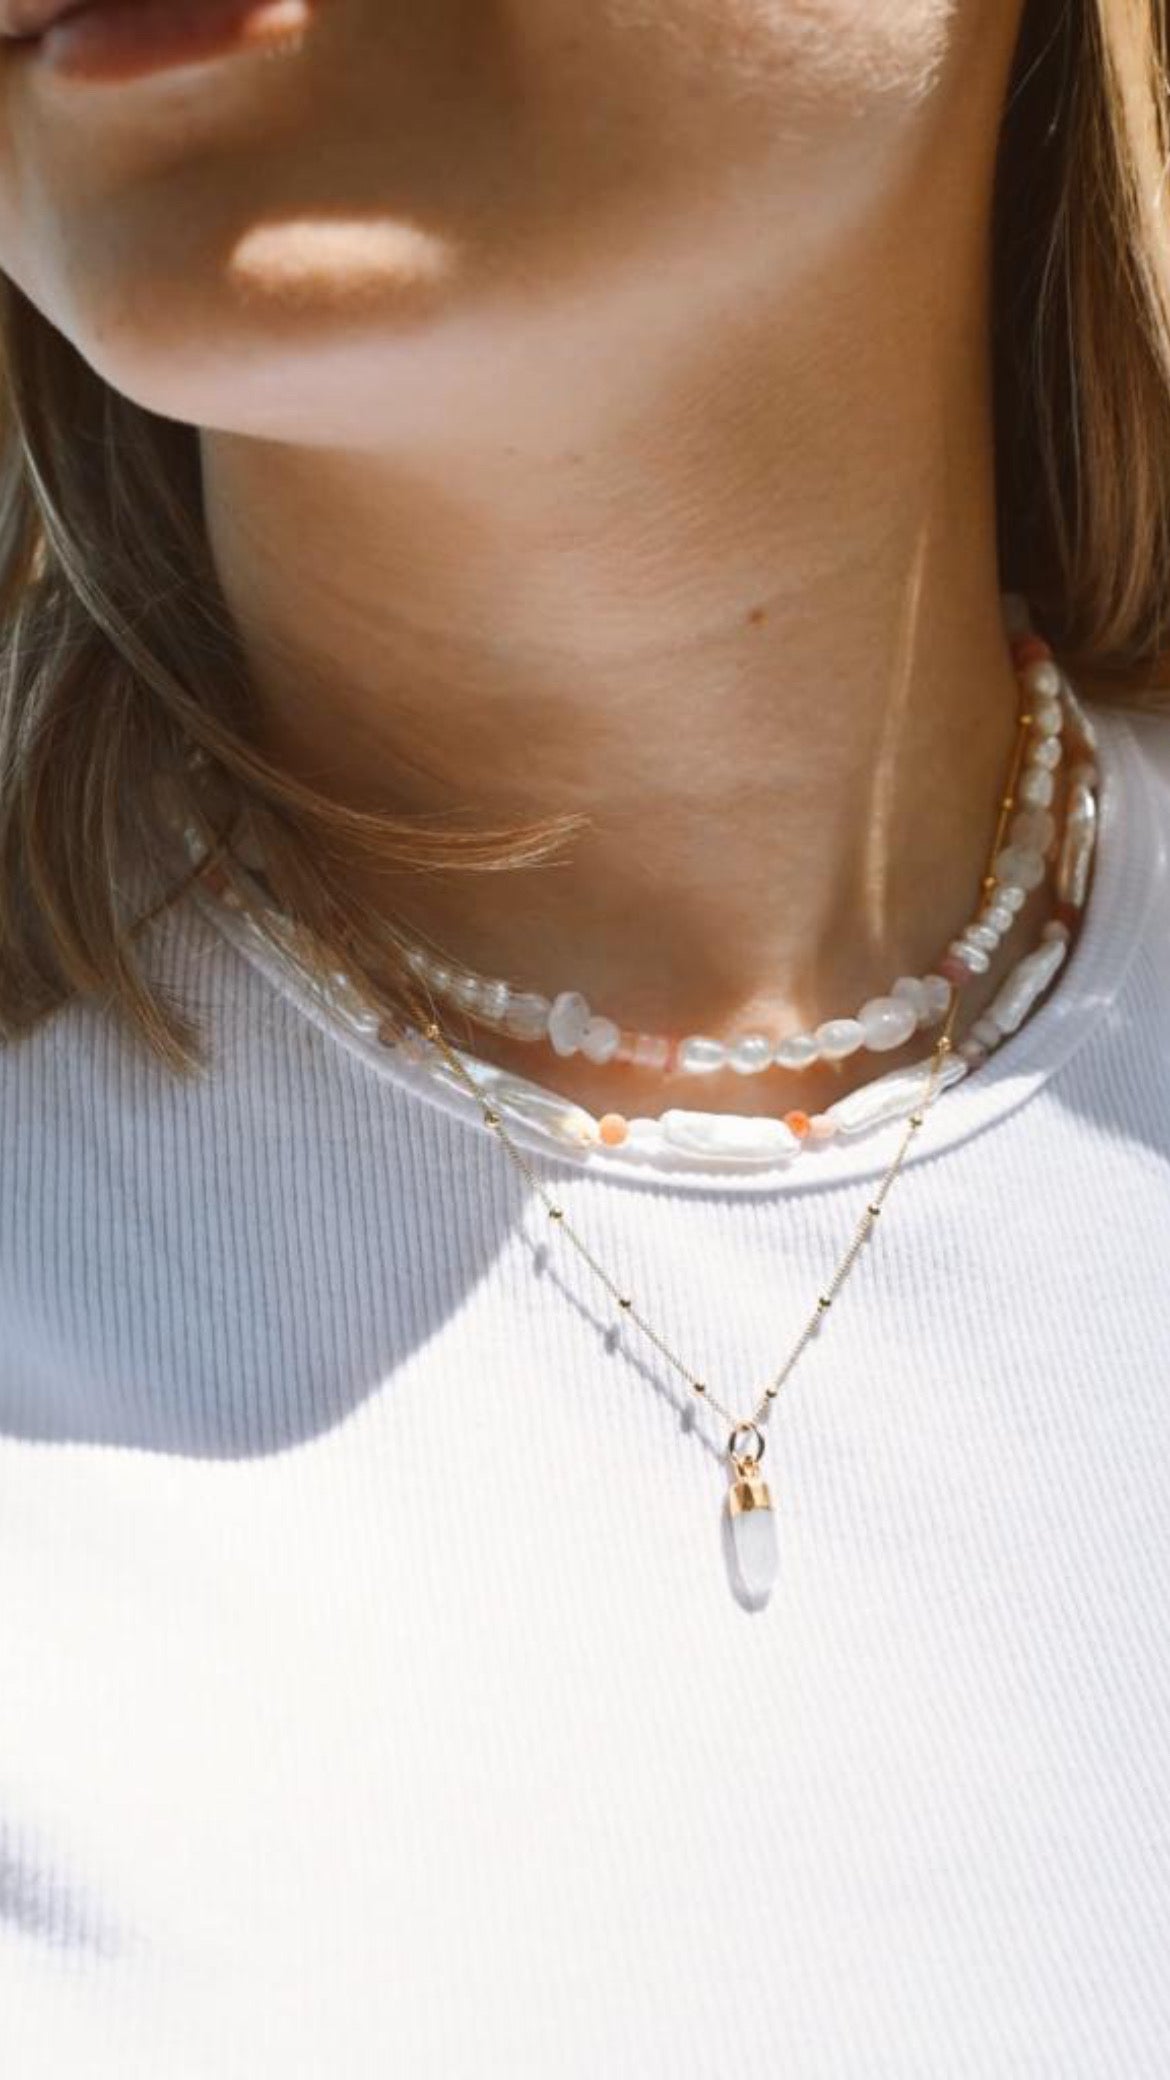 moonstone necklace layered with pearls 